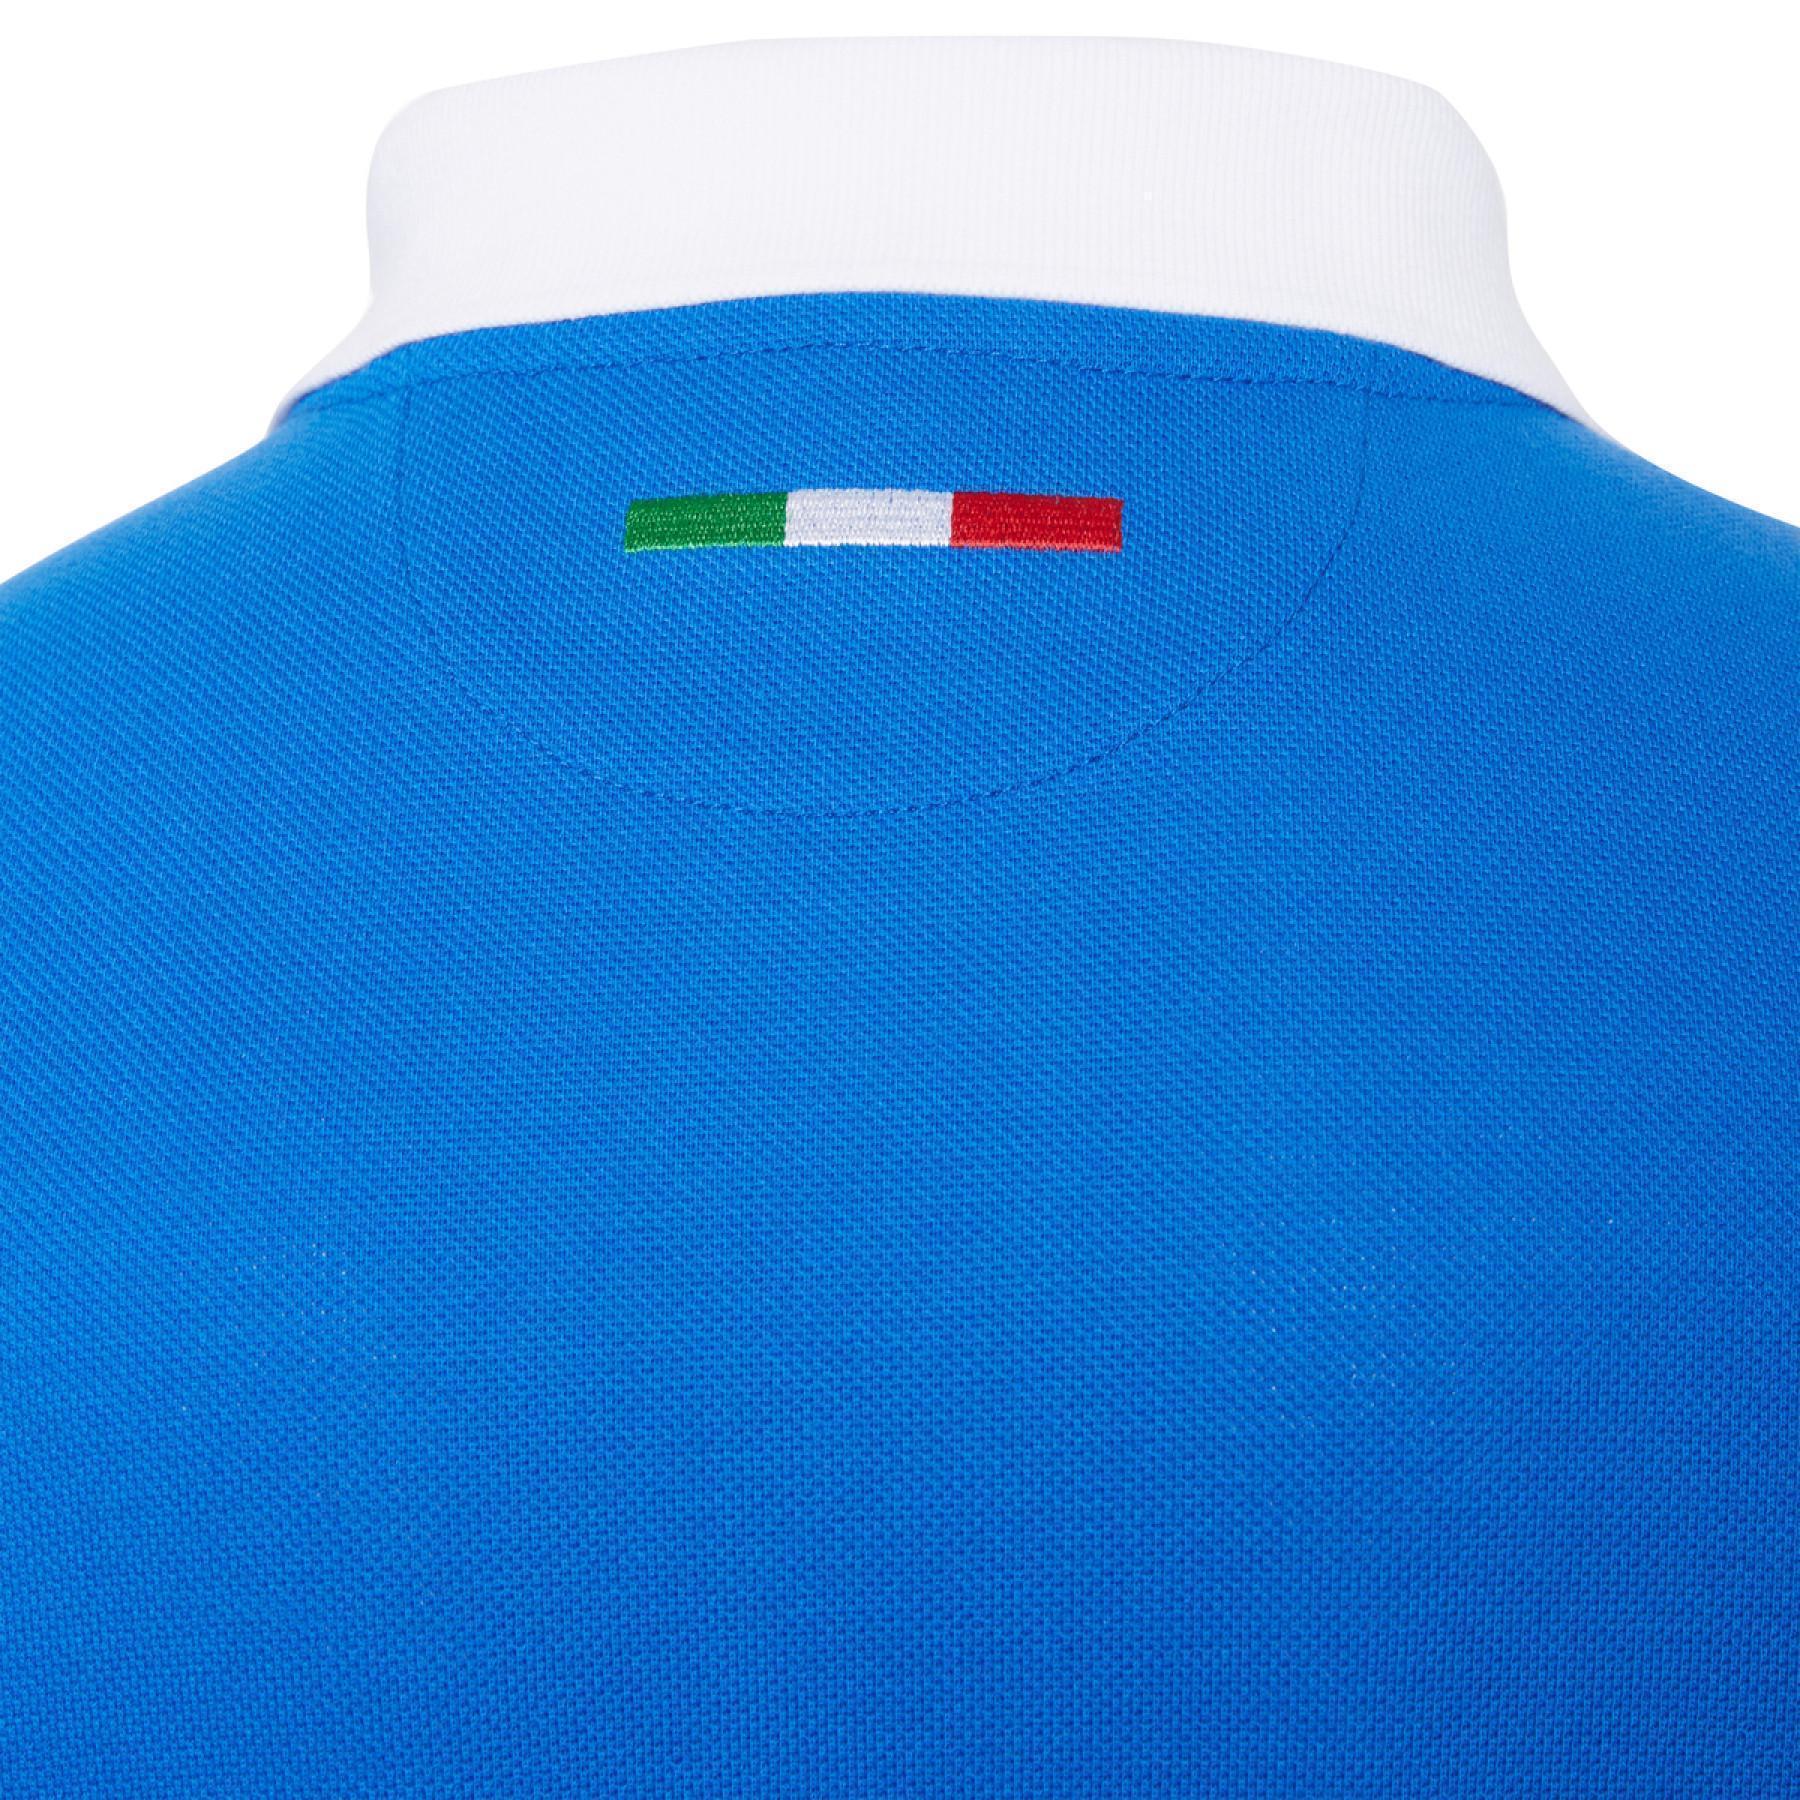 Cotton jersey Italie rugby 2020/21